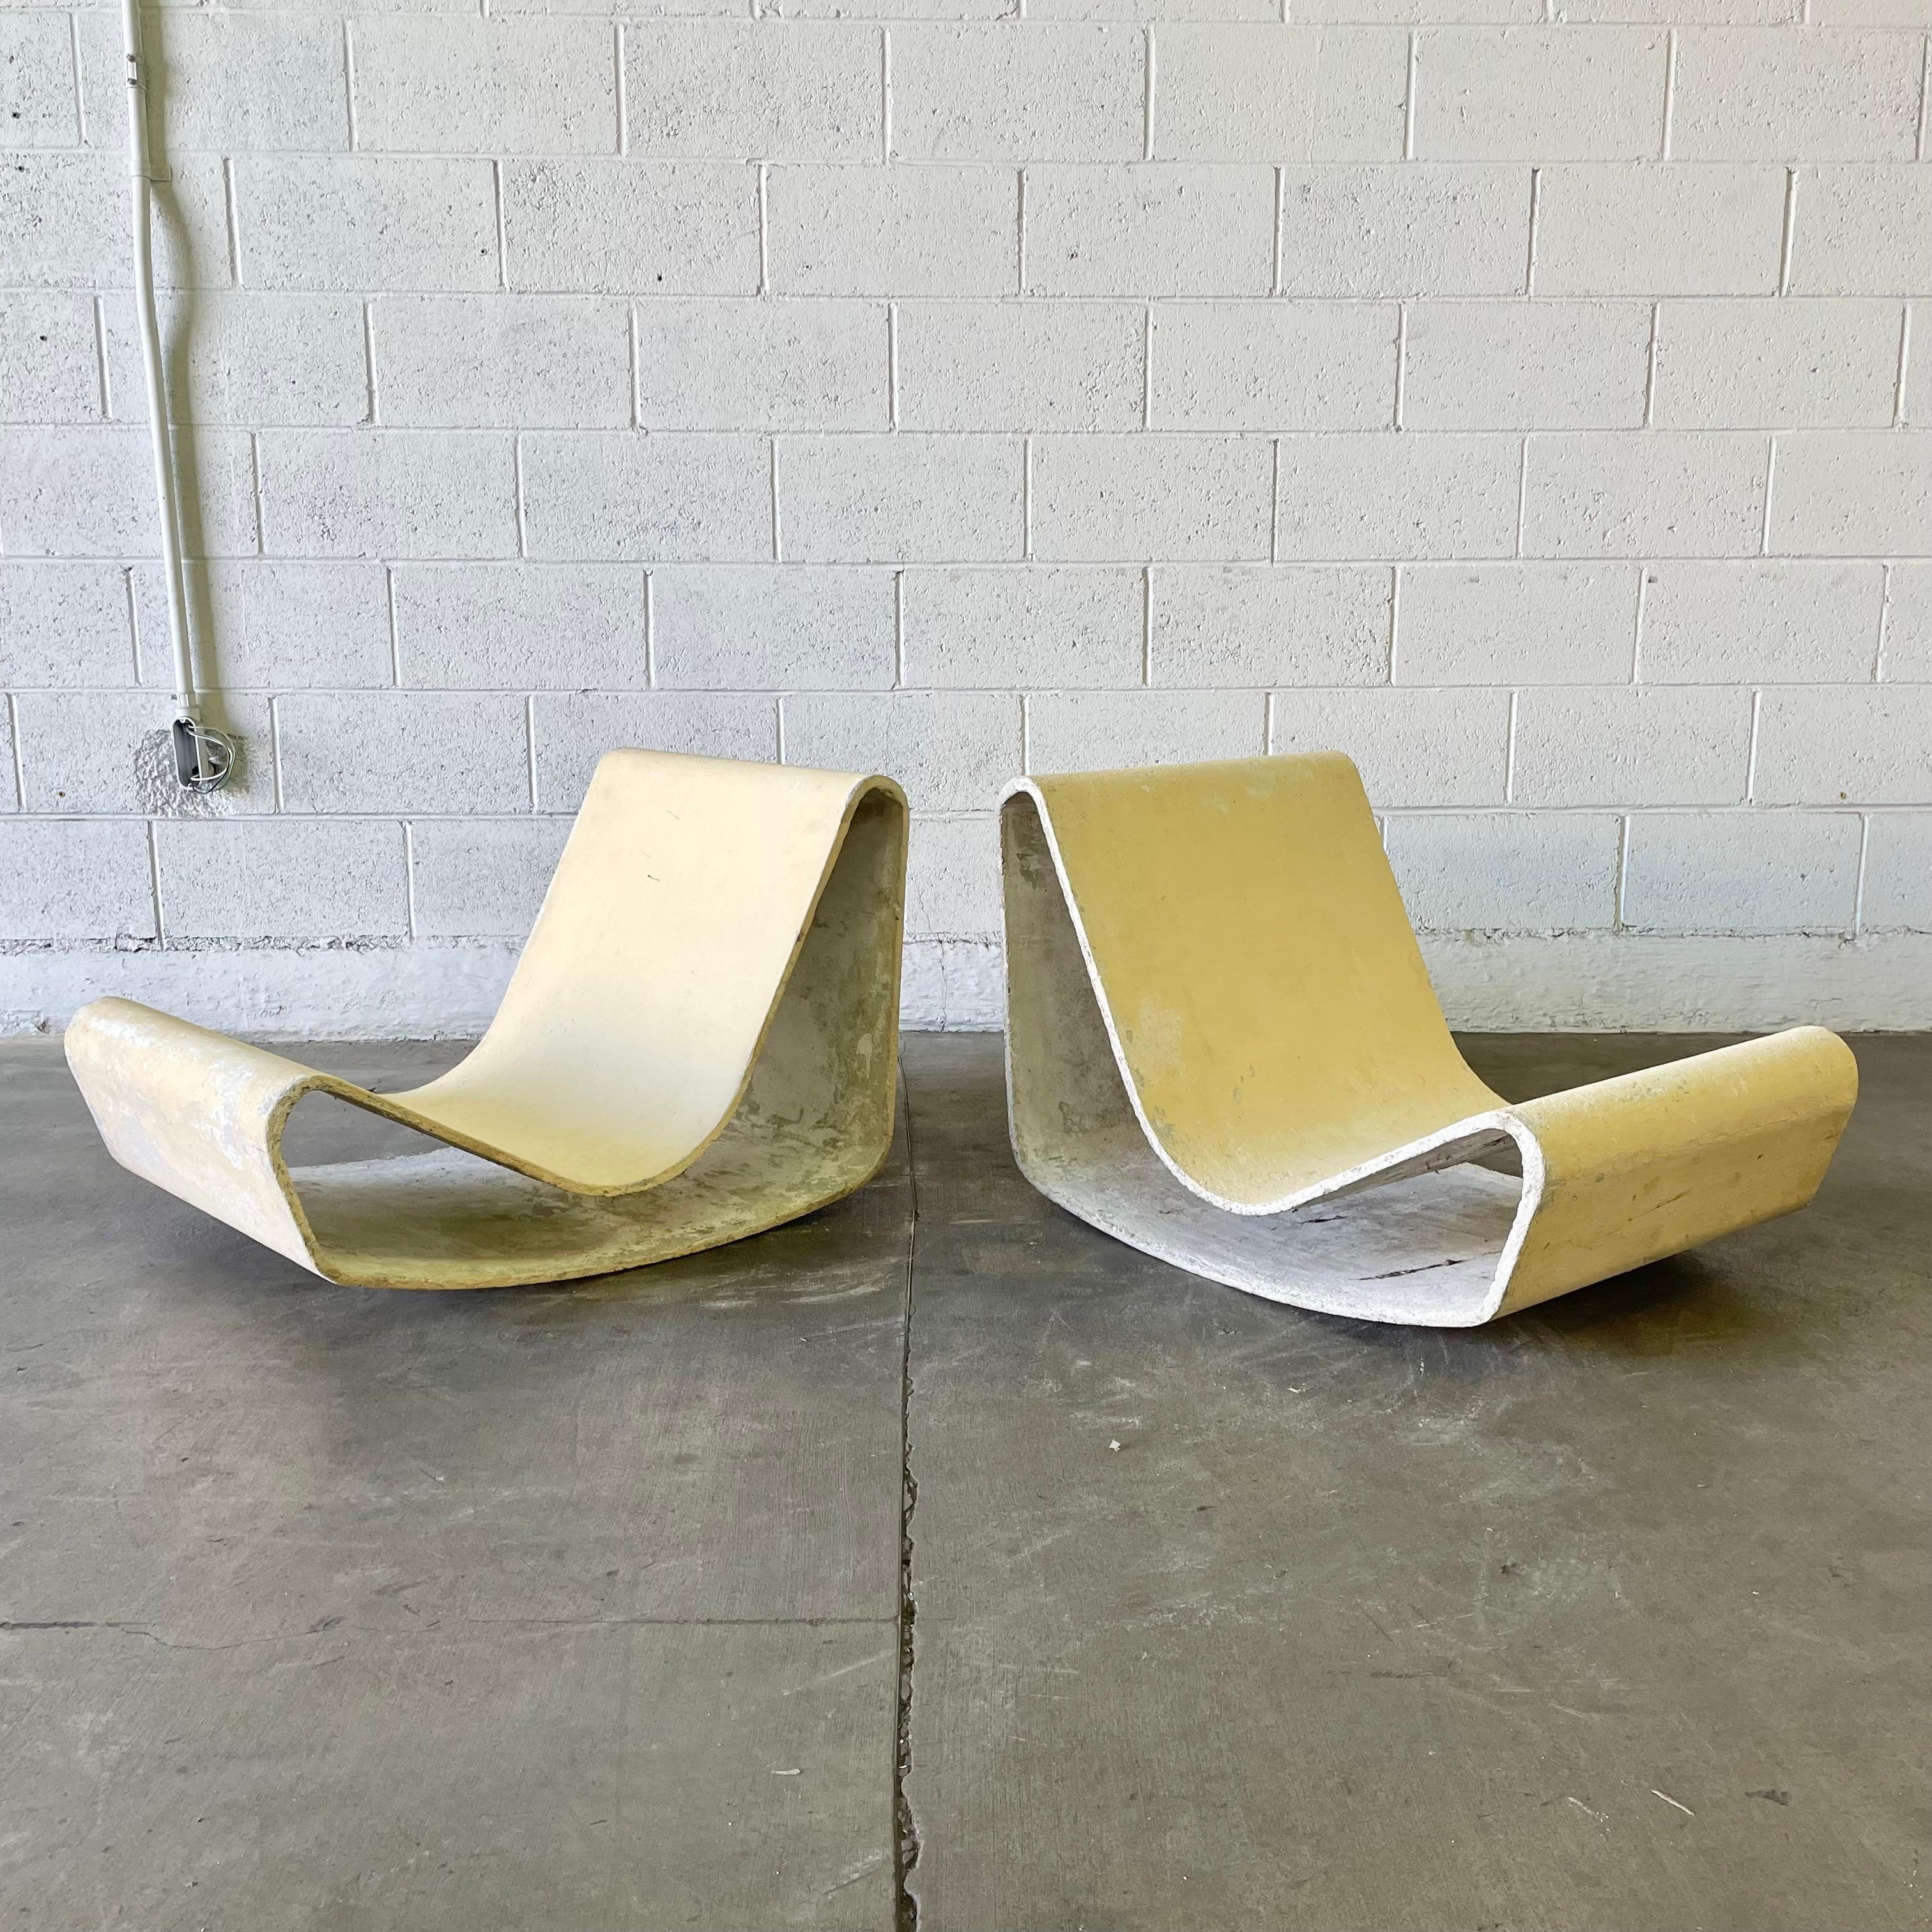 Iconic pair of concrete loop chairs by Willy Guhl.

This pair of chairs were designed by Willy Guhl in 1954 after Guhl watched as the Eternit panels left a machine at the Eternit factory in Niederurnen. With a beautiful pastel yellow patina these